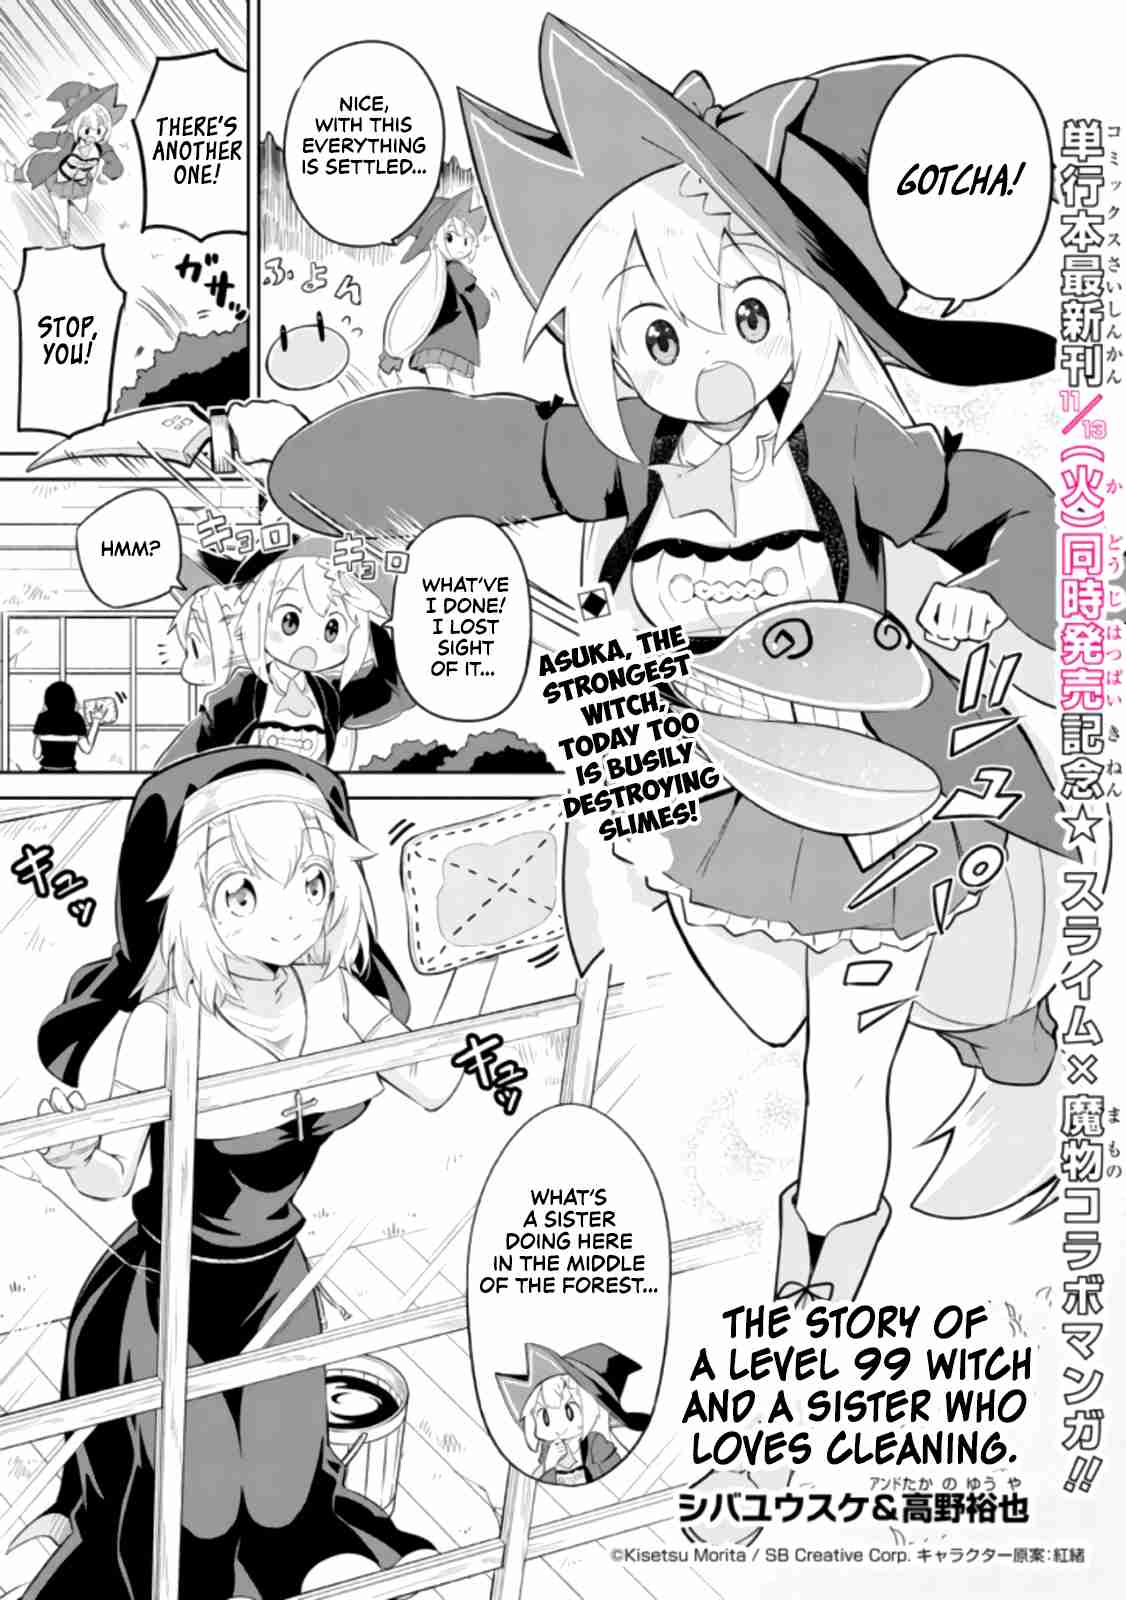 Slime Taoshite 300 nen, Shiranai Uchi ni Level MAX ni Nattemashita Ch. 22.99 The Story of a Level 99 Witch and a Sister who loves cleaning ( Special Collab Chapter )